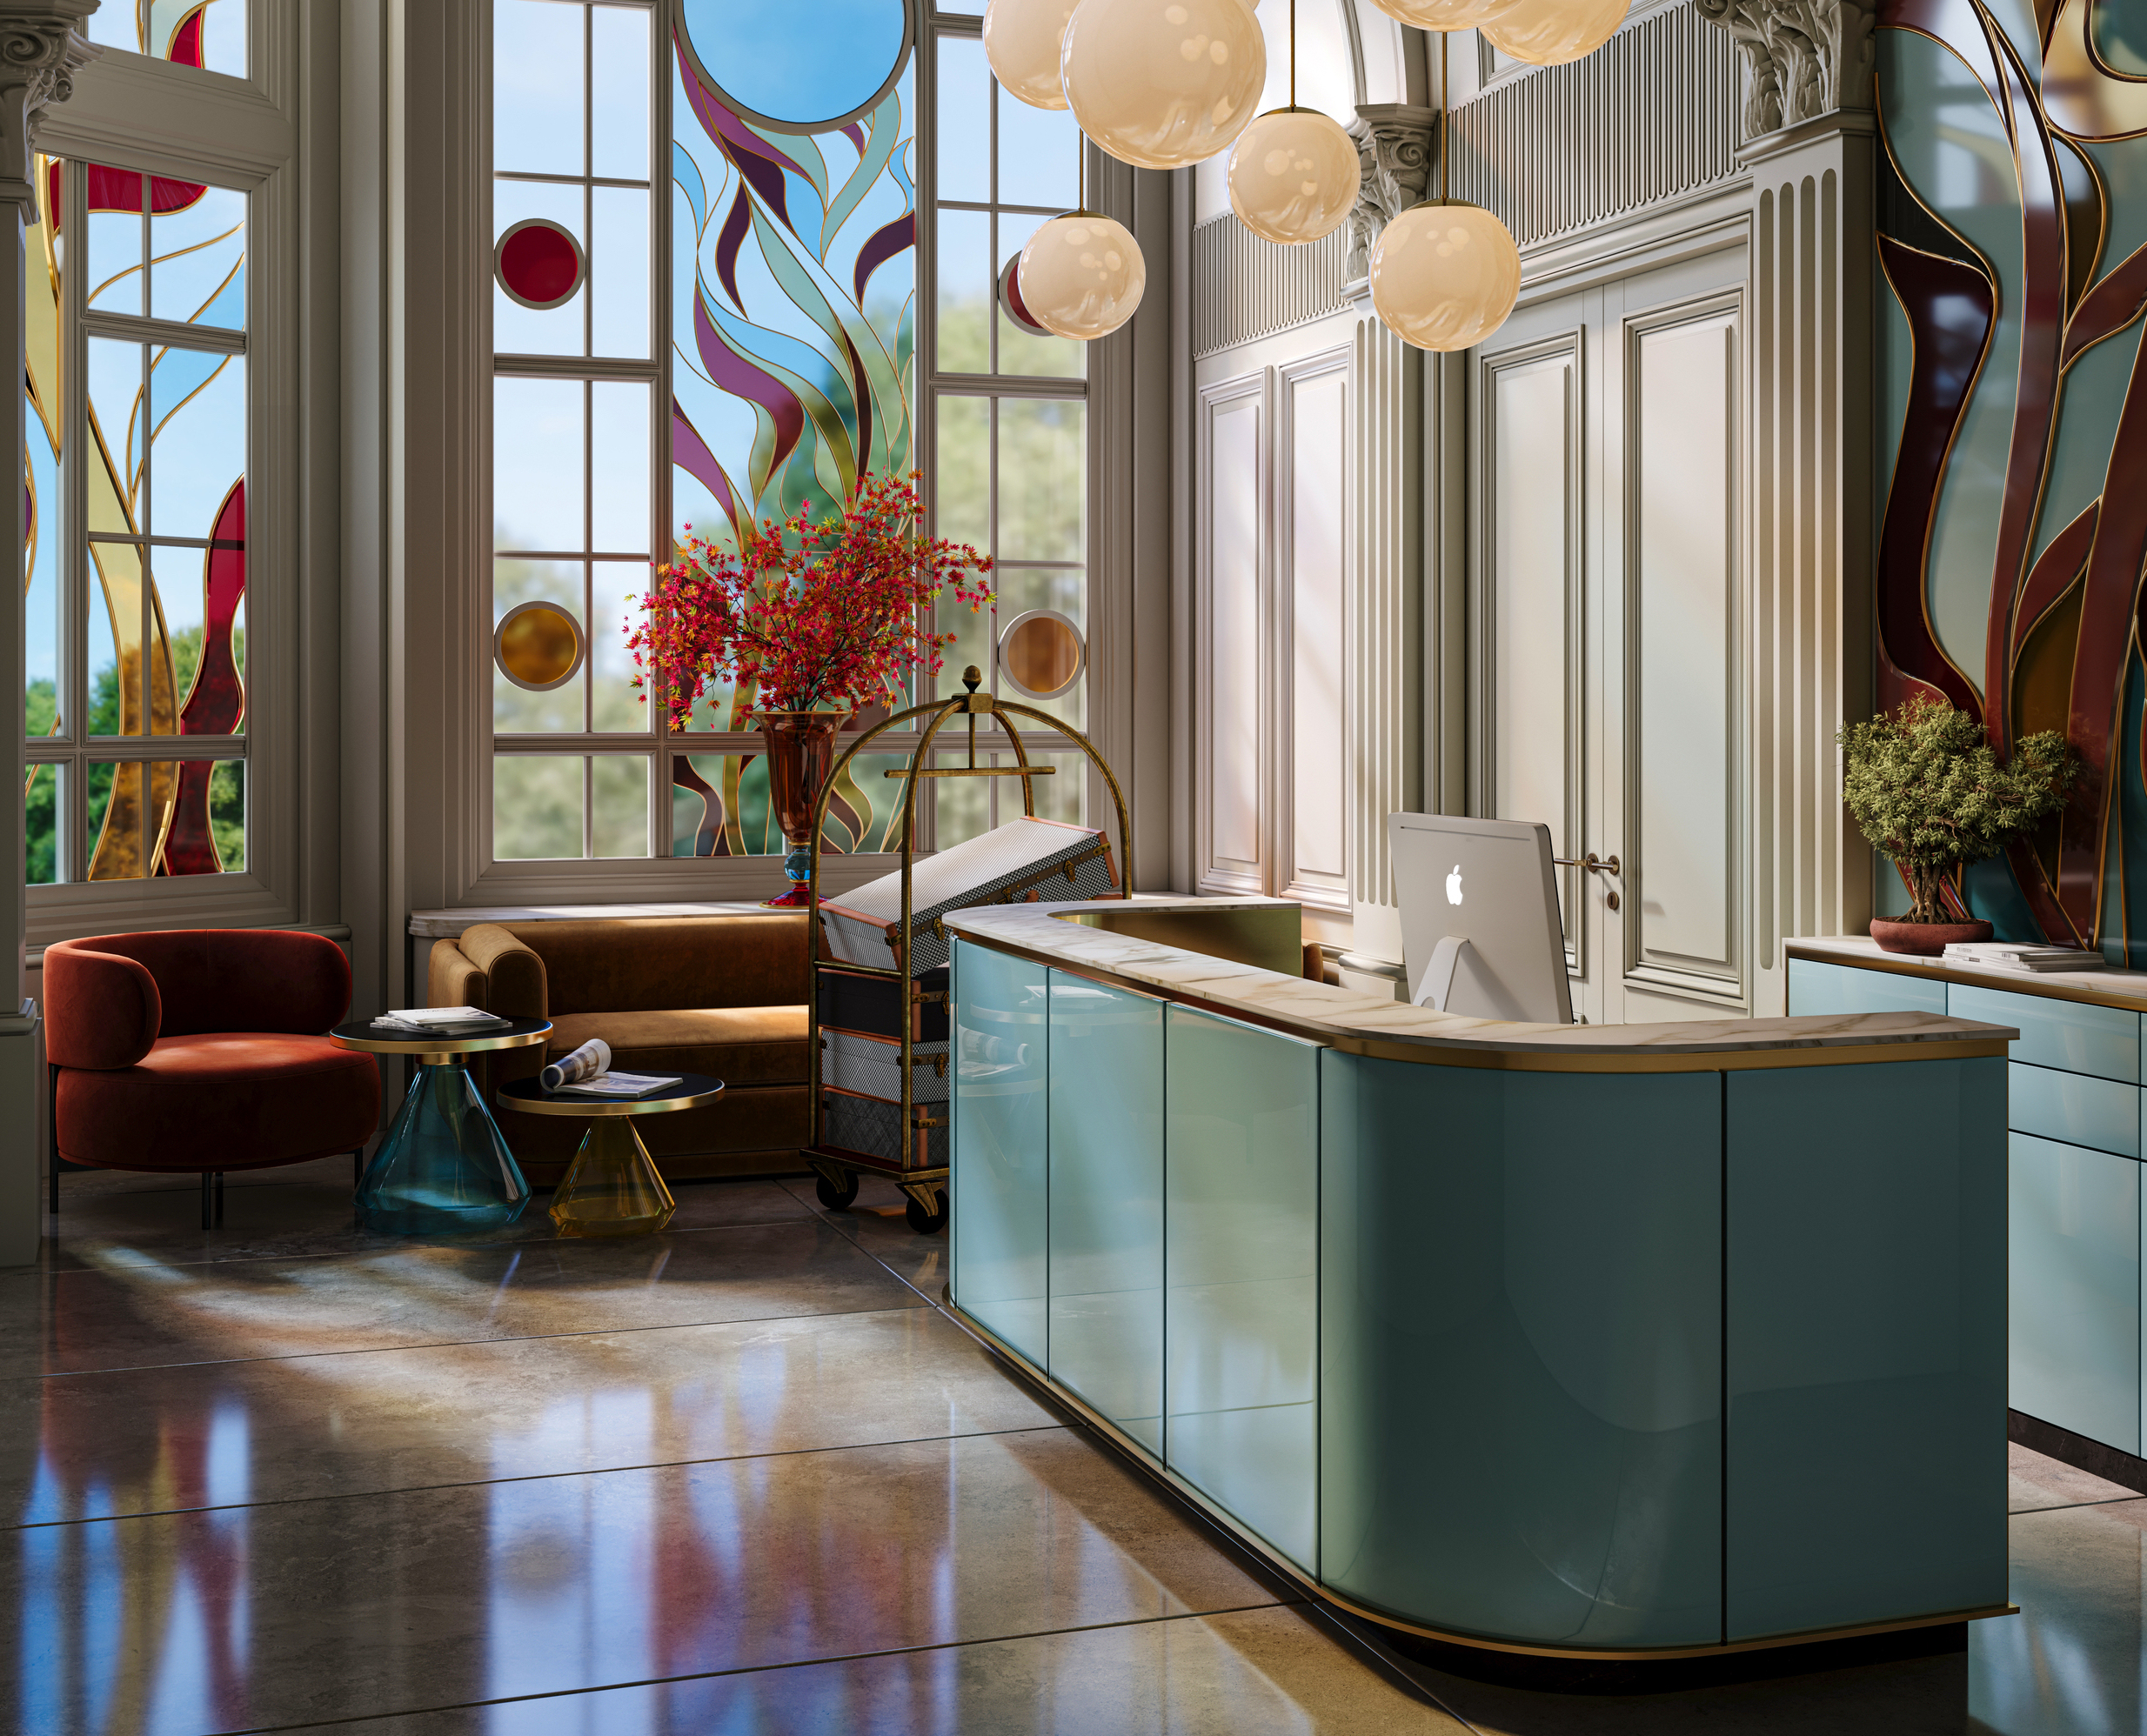 HOTELS AND RESORTS 3D INTERIOR RENDERING